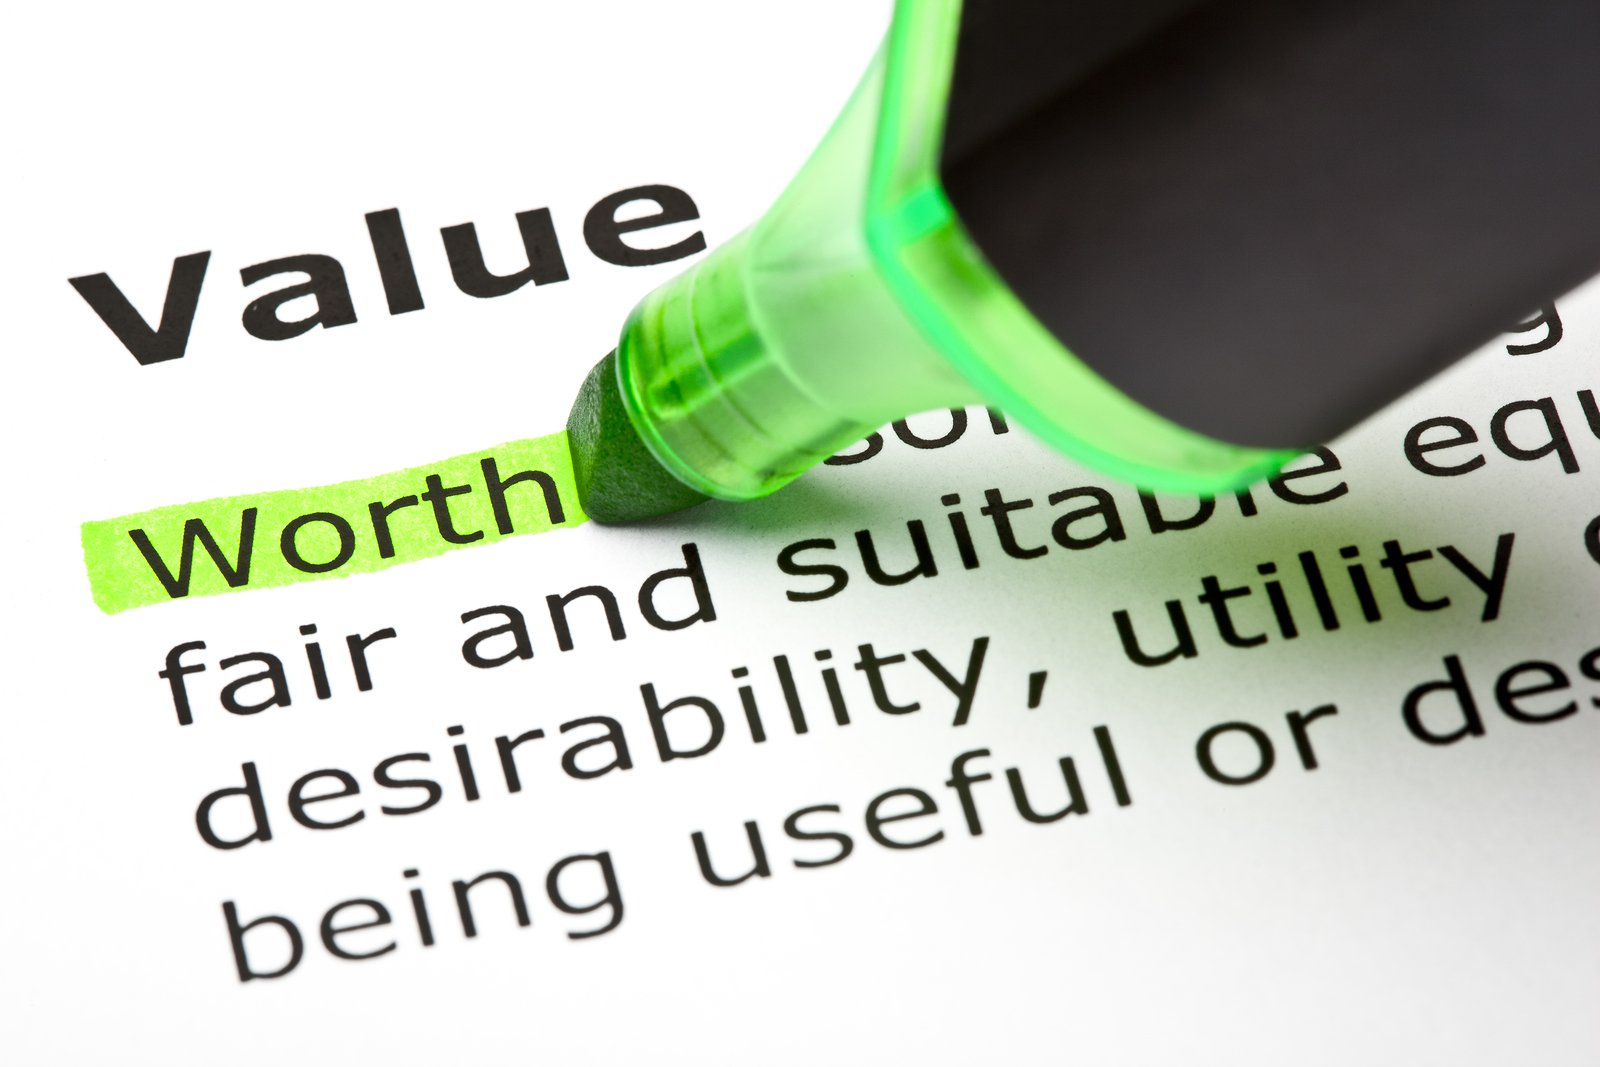 importance of values